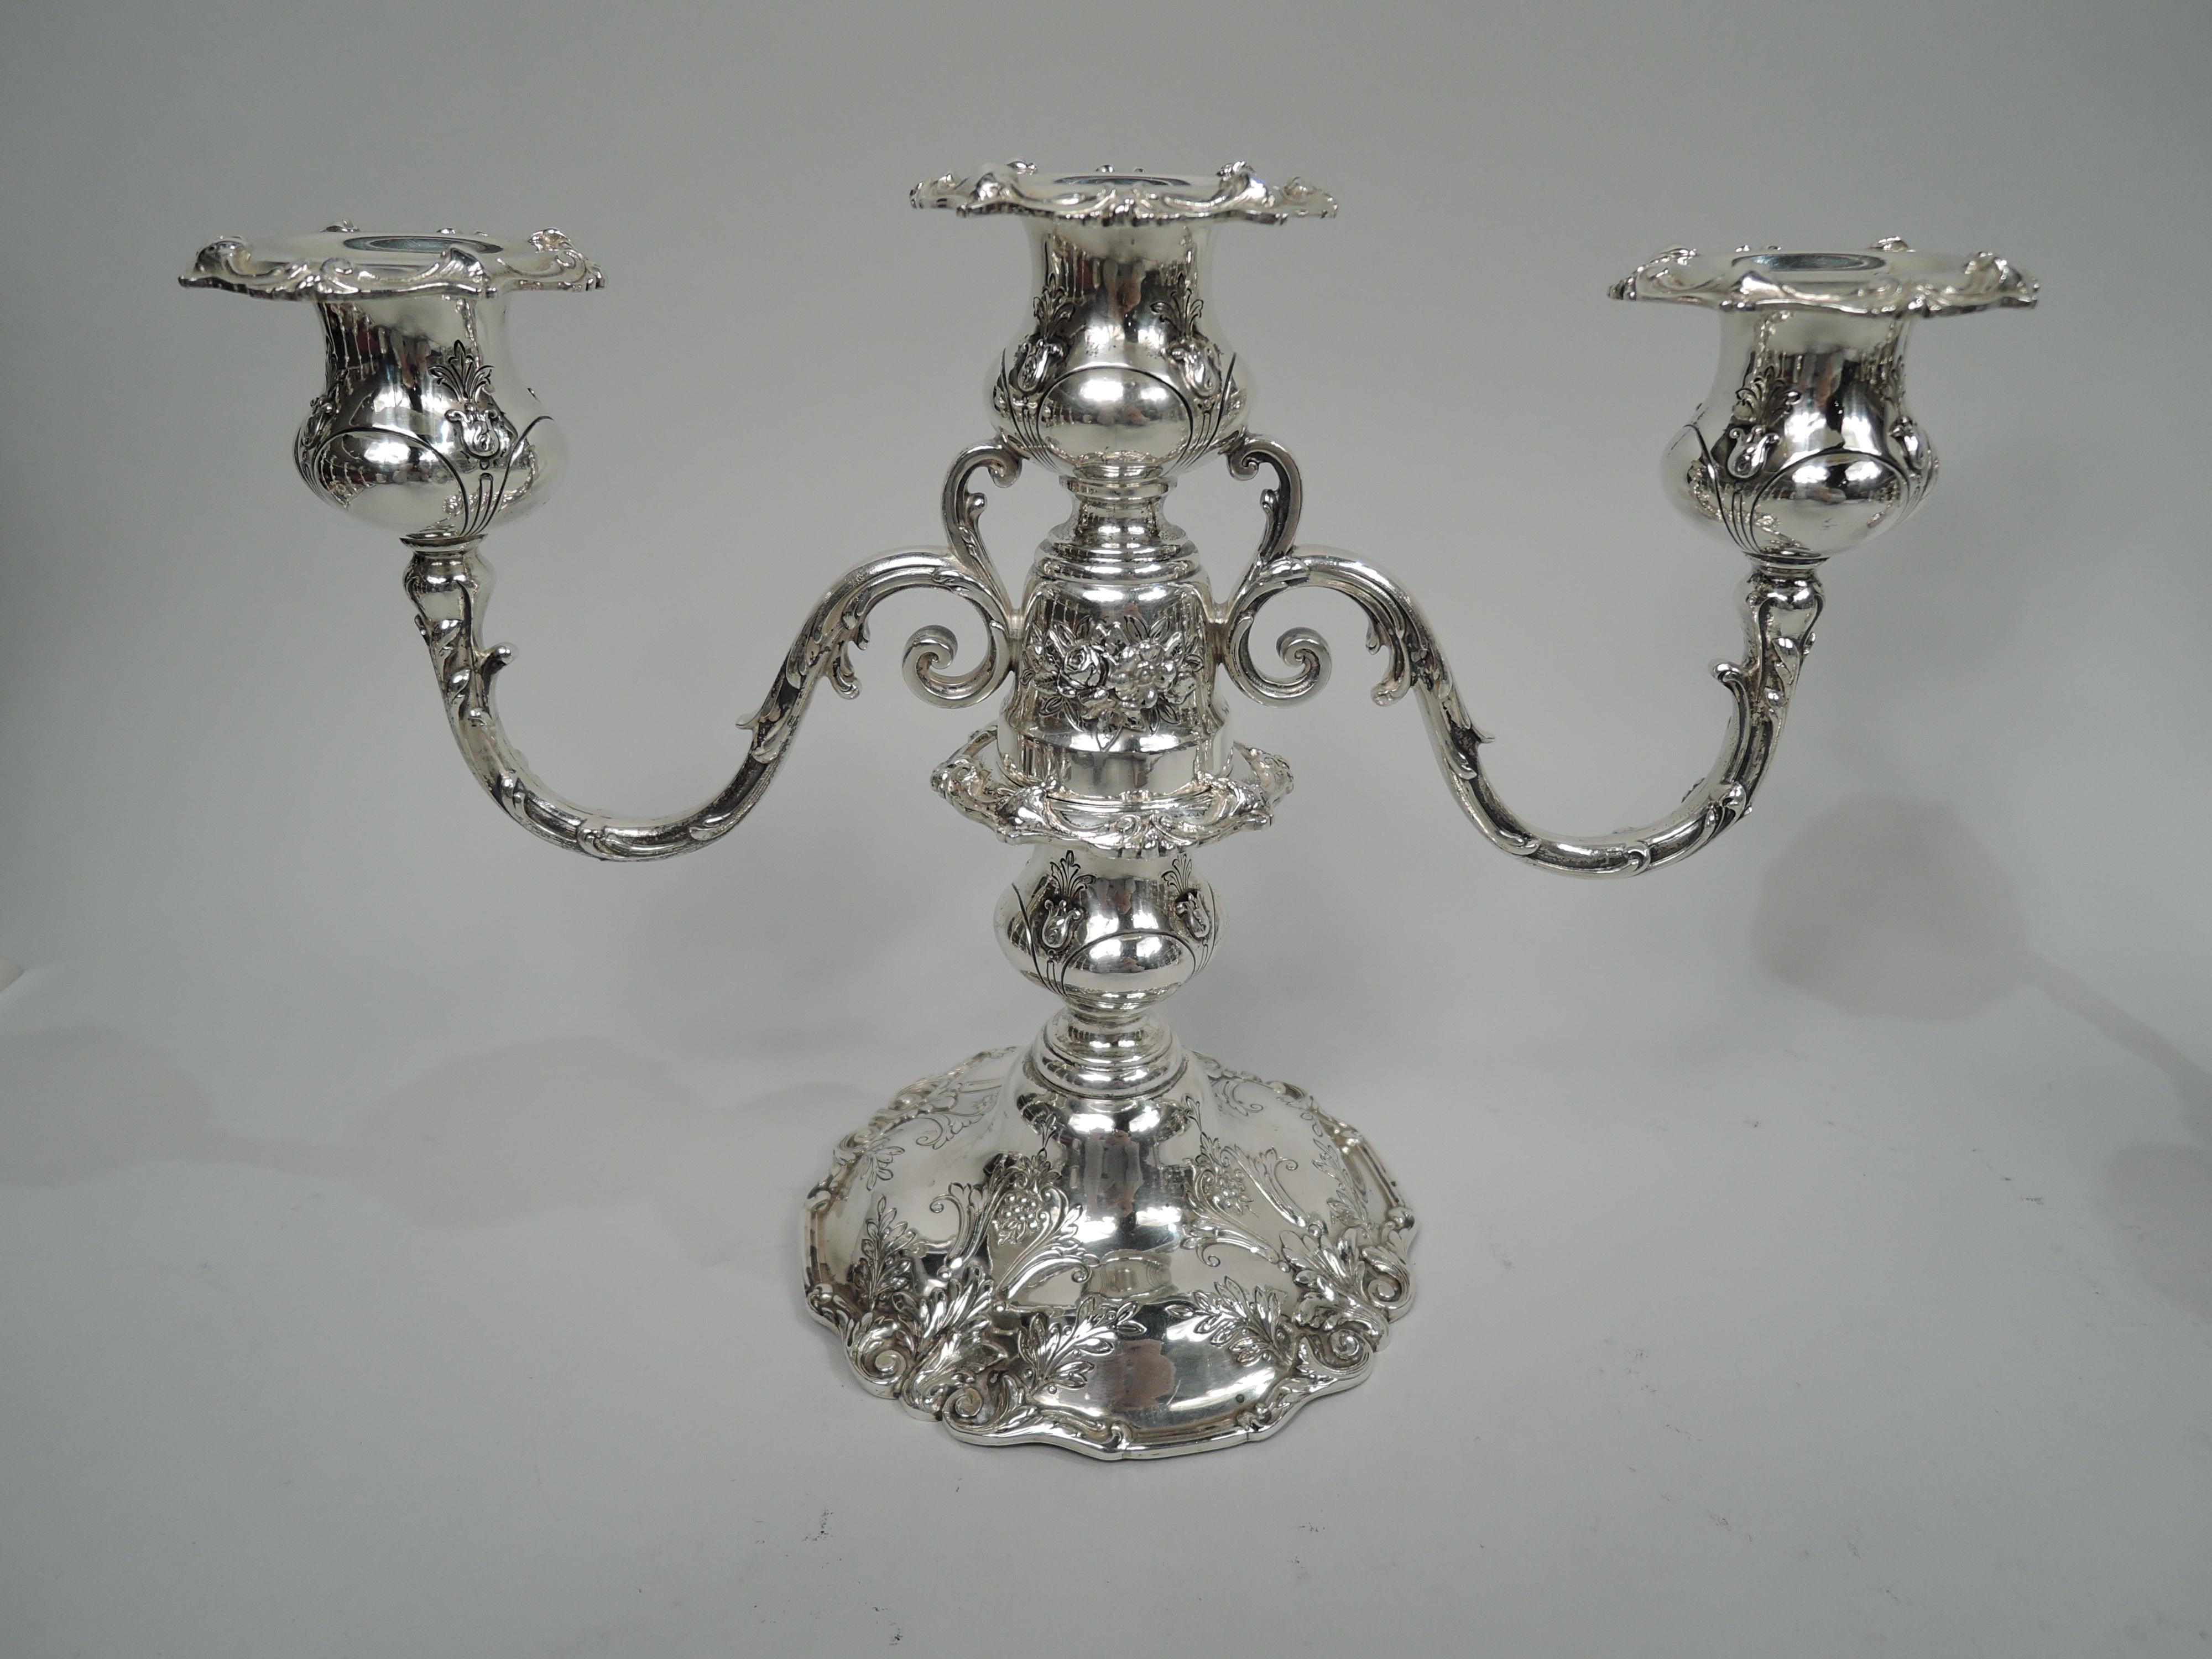 Pair of Francis I sterling silver low 3-light candelabra. Made by Reed & Barton in Taunton, Mass. in 1950. Each: Central socket on bell-form base to which are mounted 2 split-mounted and leaf-wrapped arms, each terminating in single socket. Shaft